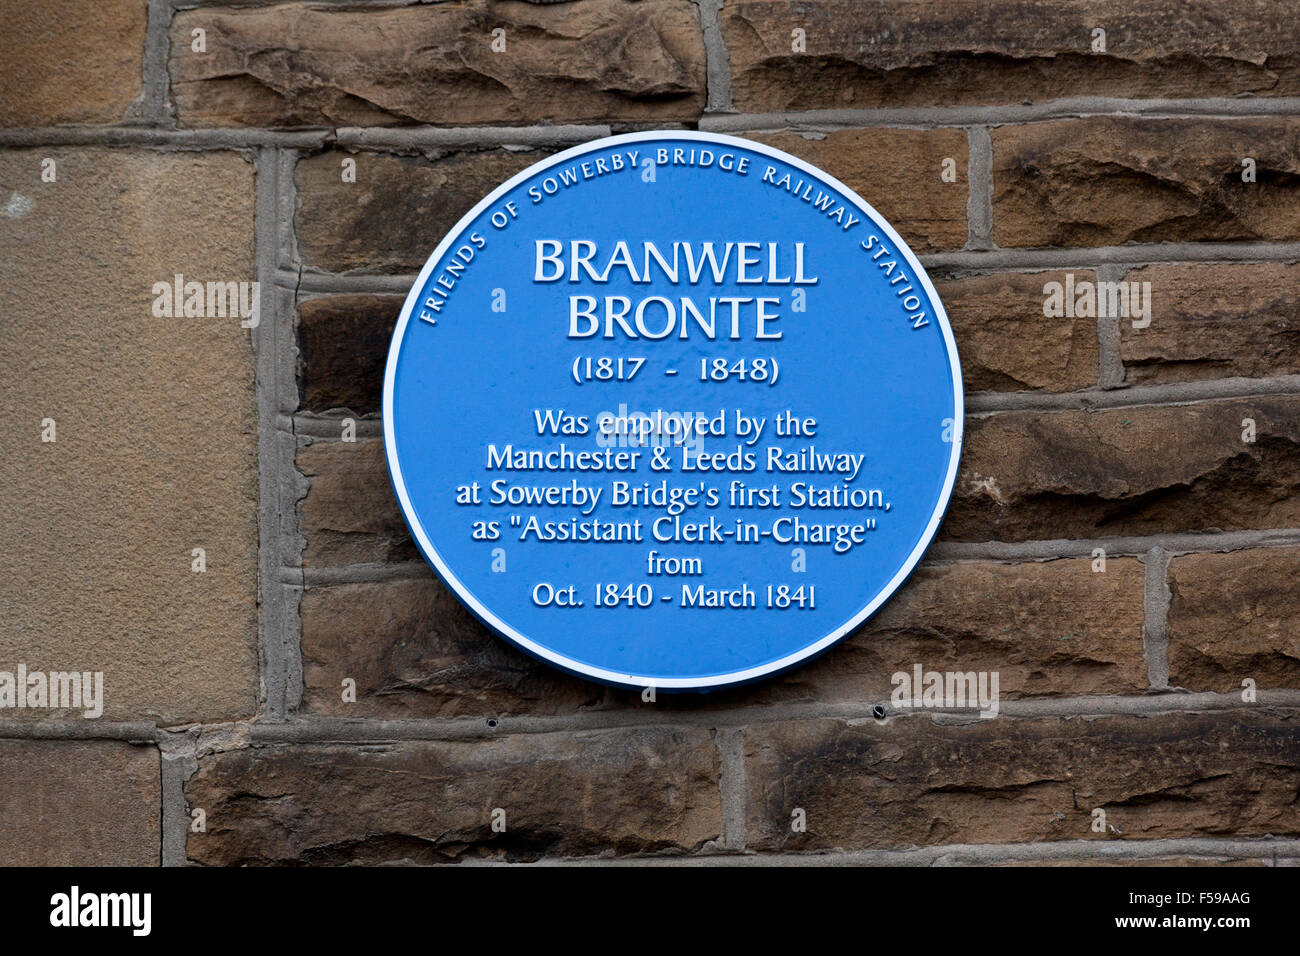 Plaque commemorating Branwell Brontë's employment at Sowerby Bridge railway station, West Yorkshire Stock Photo